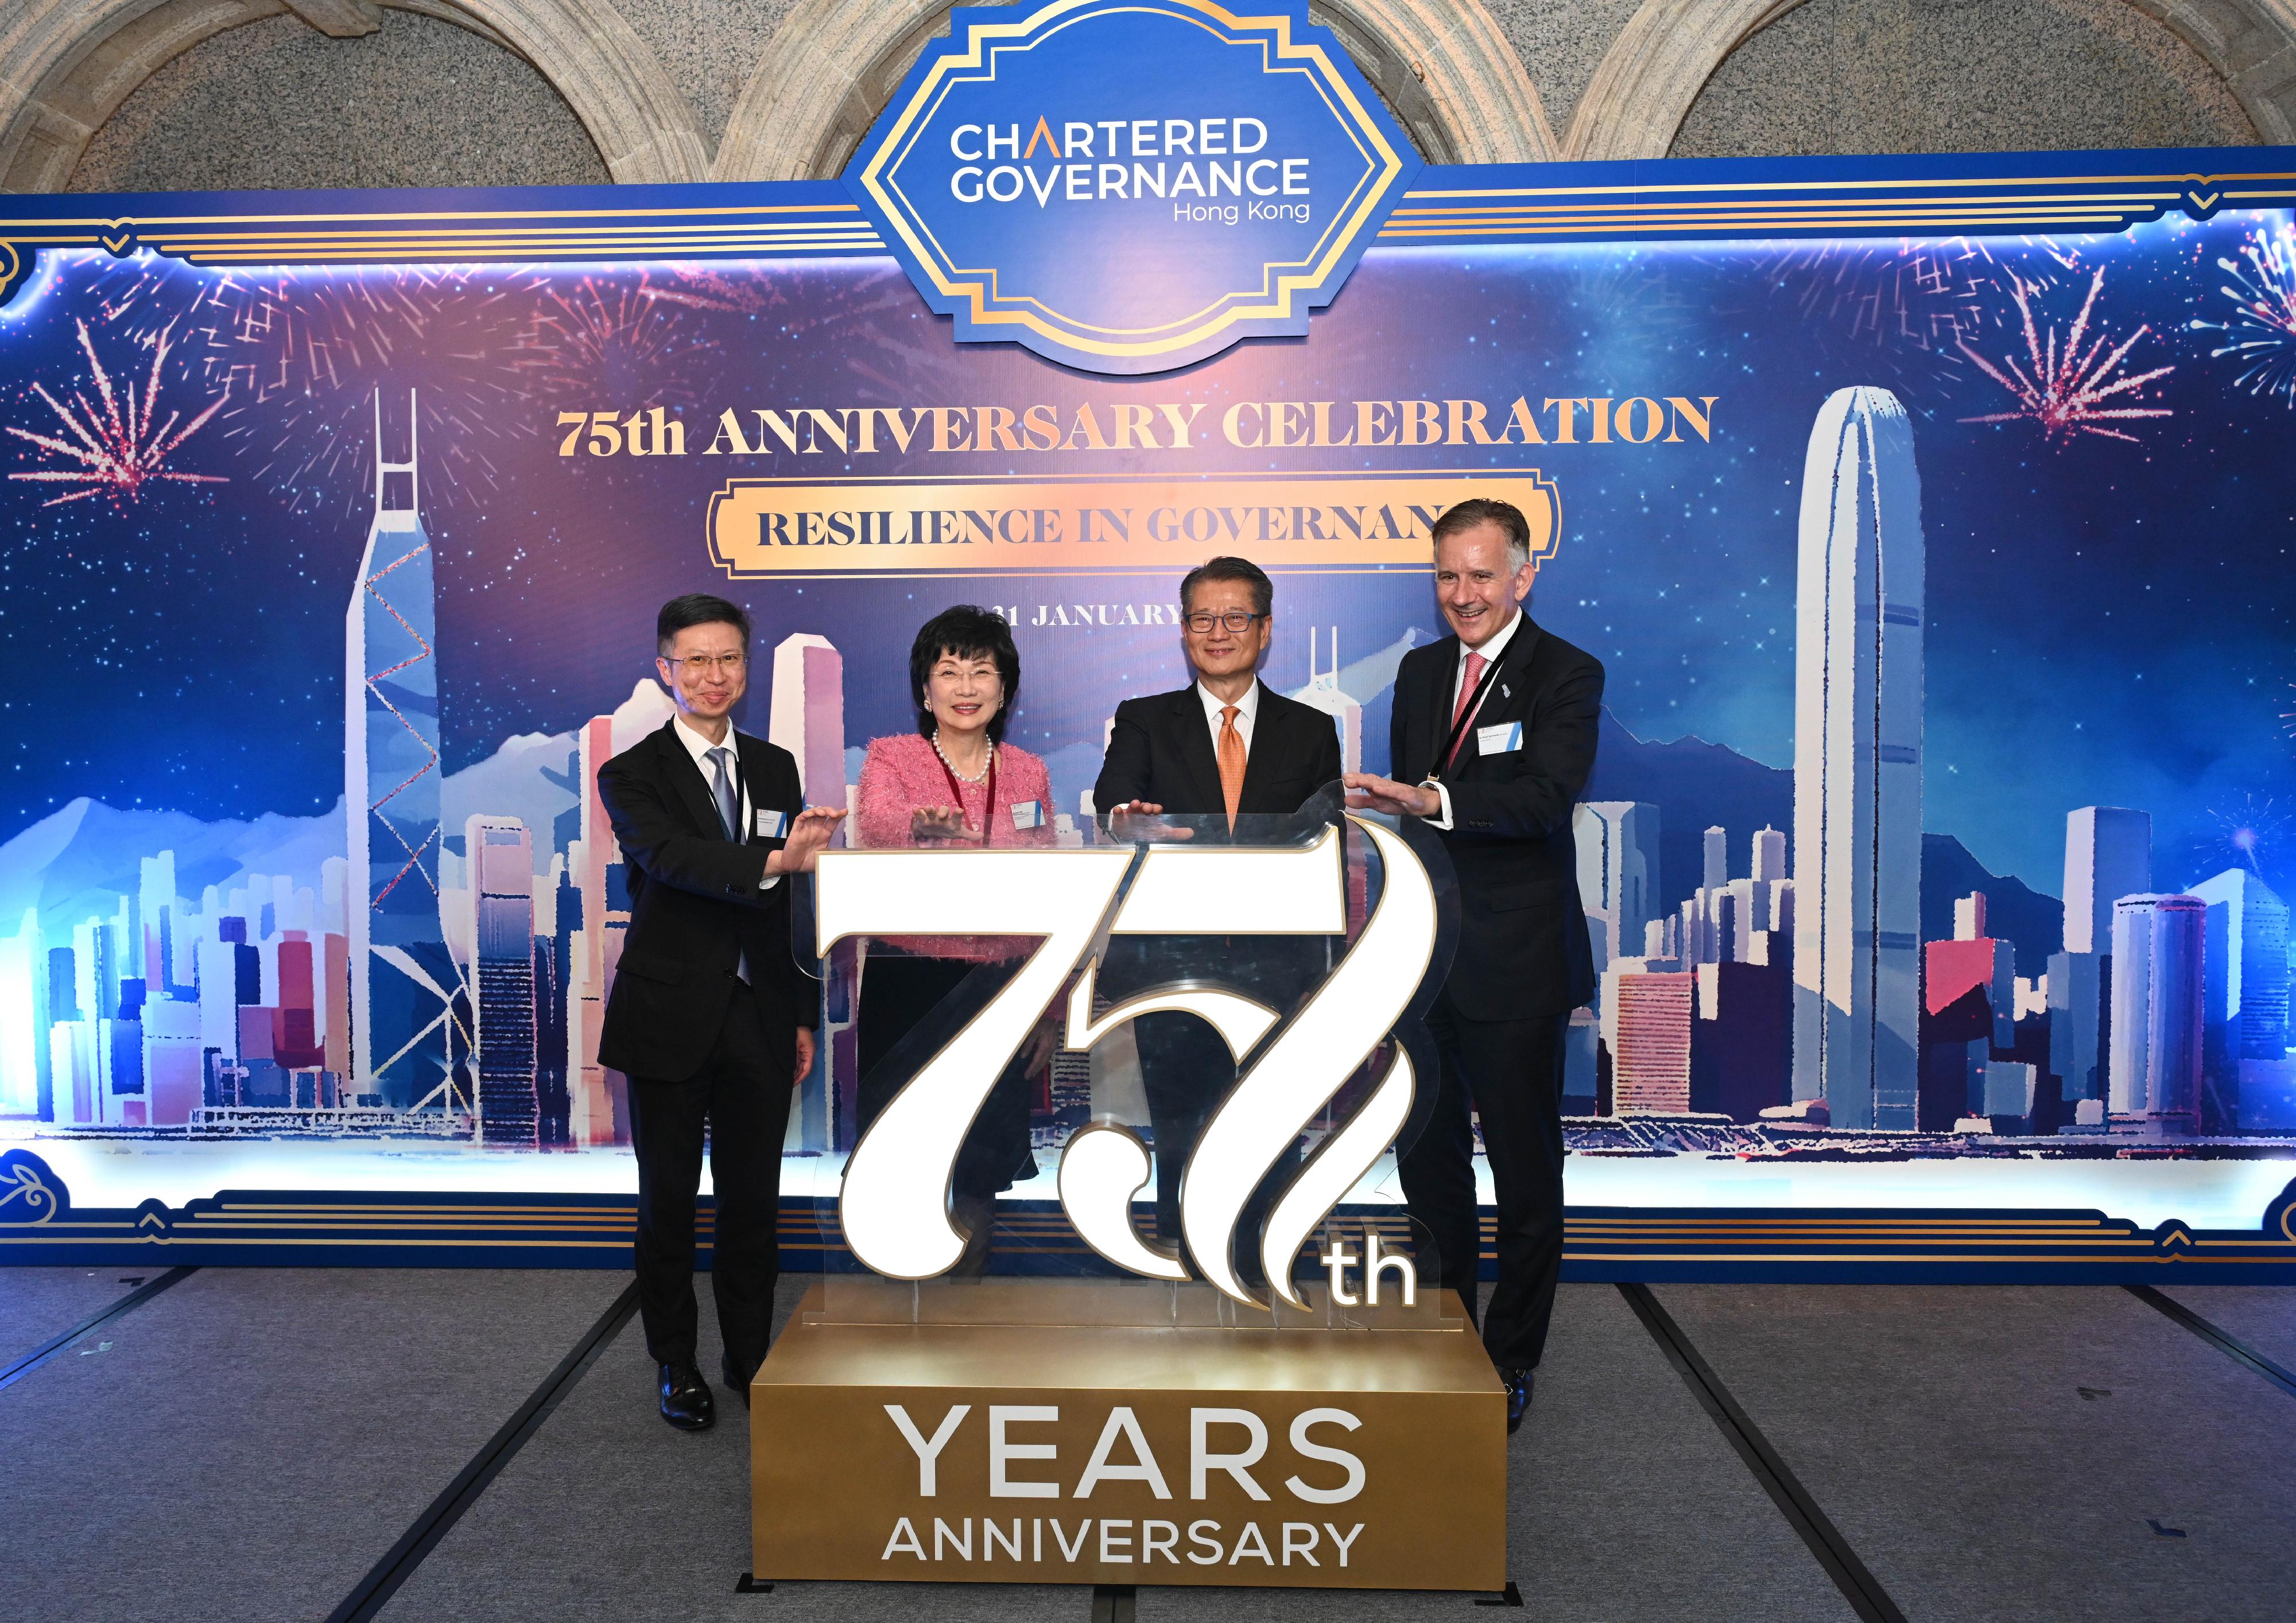 The Financial Secretary, Mr Paul Chan, attended the Hong Kong Chartered Governance Institute (HKCGI) 75th Anniversary Celebration today (January 31). Photo shows (from left) the immediate past President of the HKCGI, Mr Ernest Lee; past President of the HKCGI Ms Edith Shih; Mr Chan; and the President of the HKCGI, Mr David Simmonds  at the celebration. 